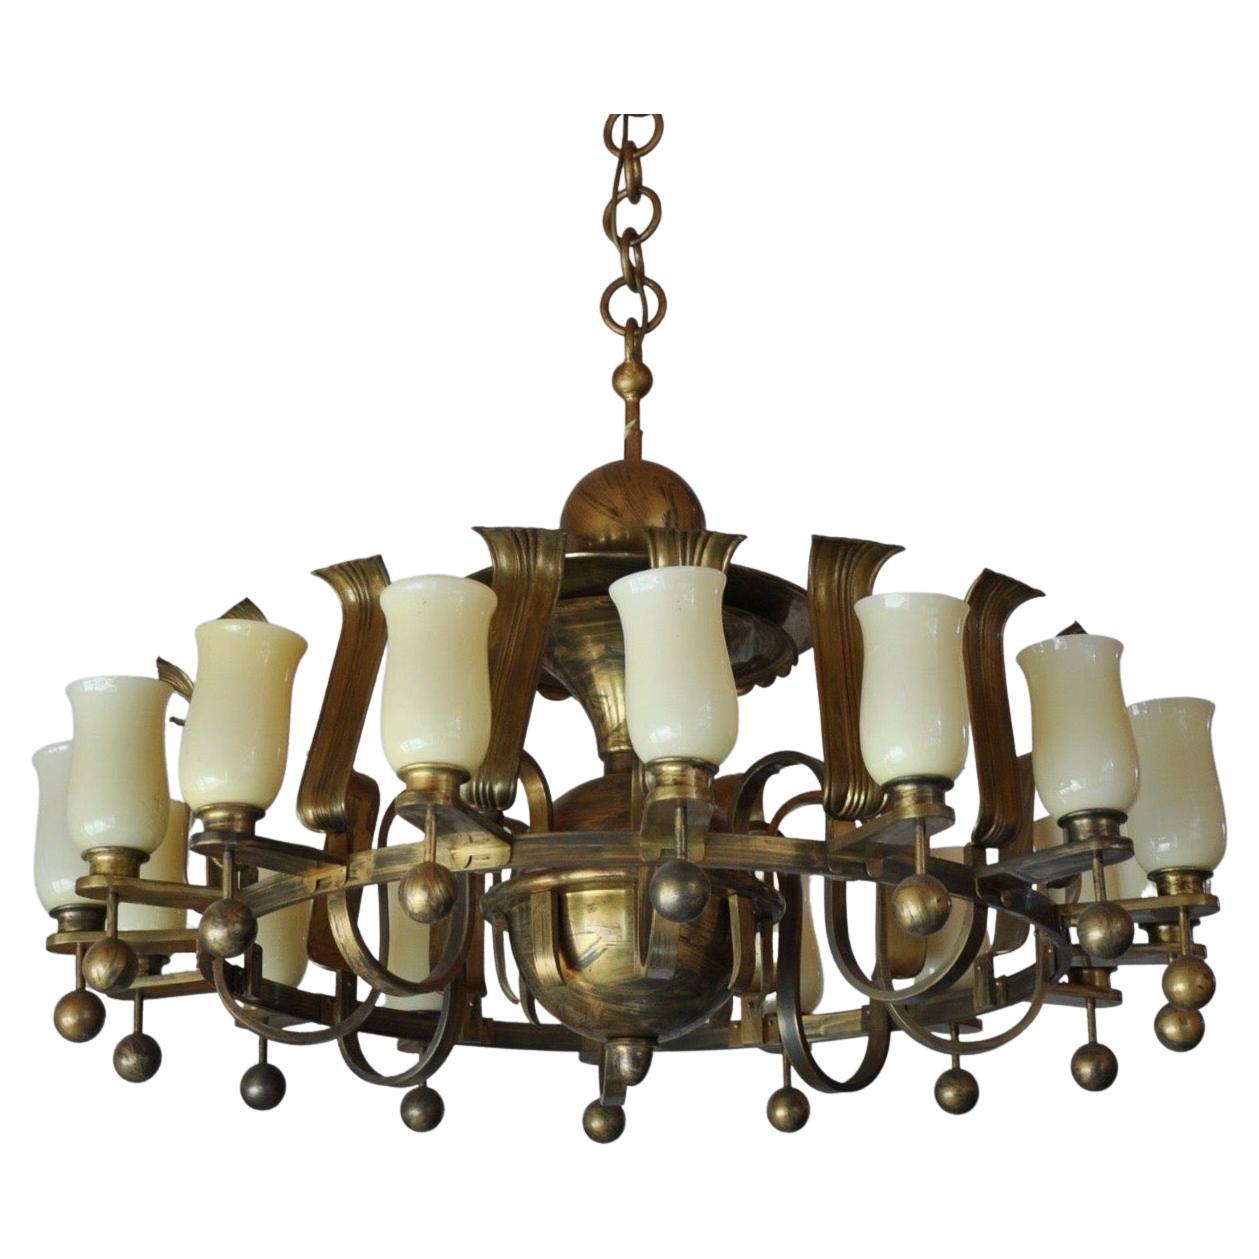 Mid-20th Century Huge German Art Deco Solid Brass and Opal Glass Chandelier, 1930s